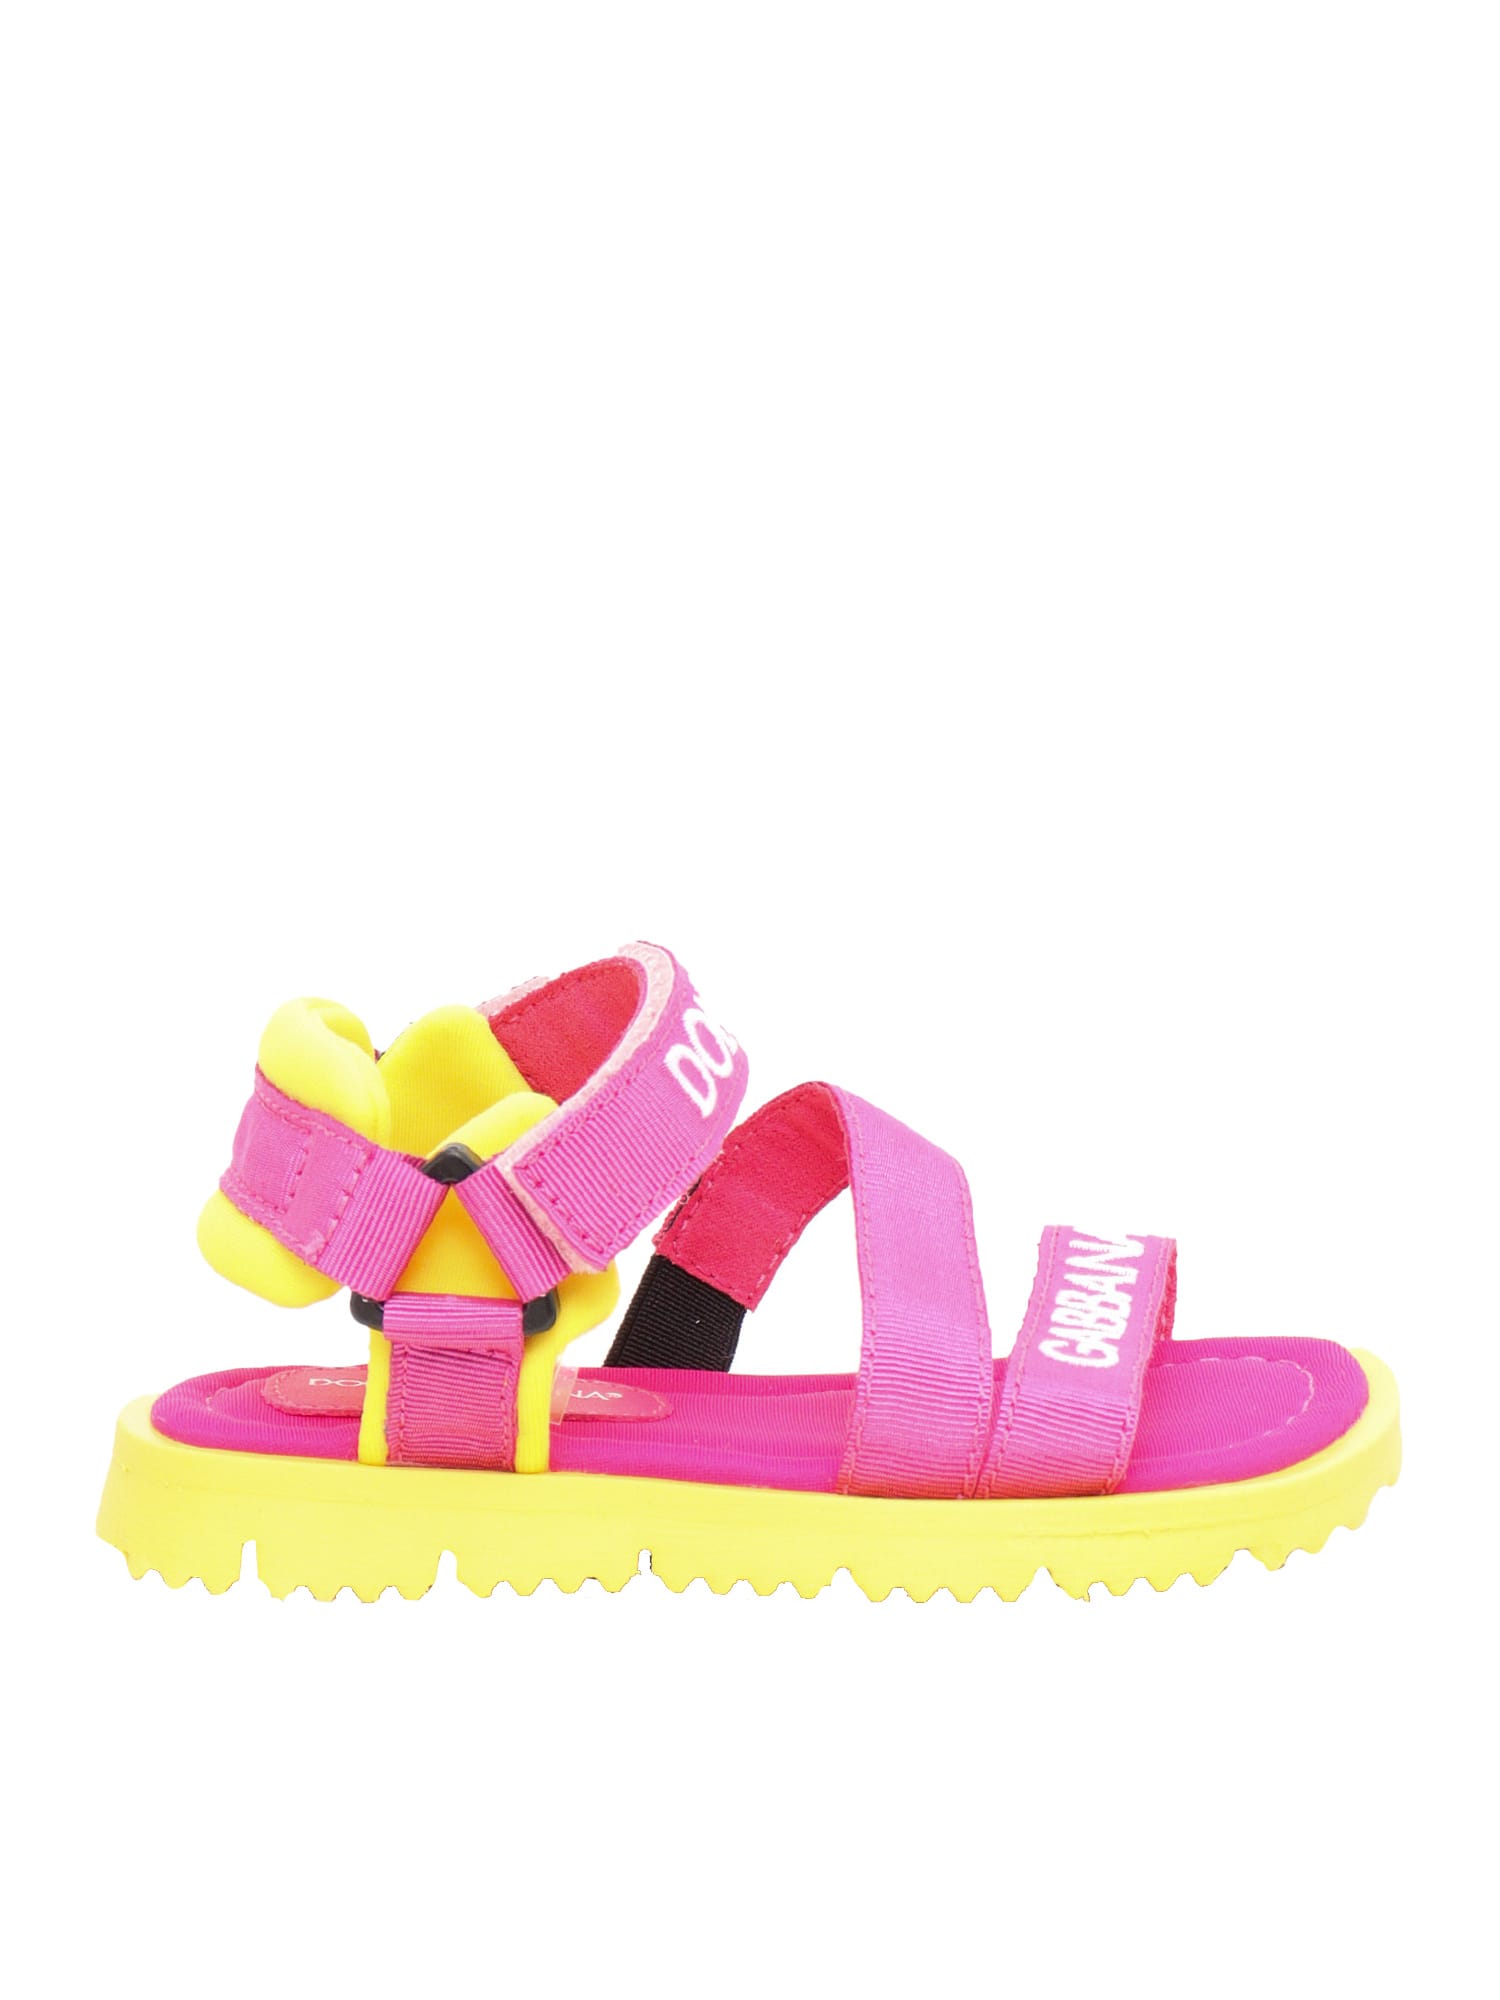 Dolce & Gabbana Pink And Yellow D & g Sandals